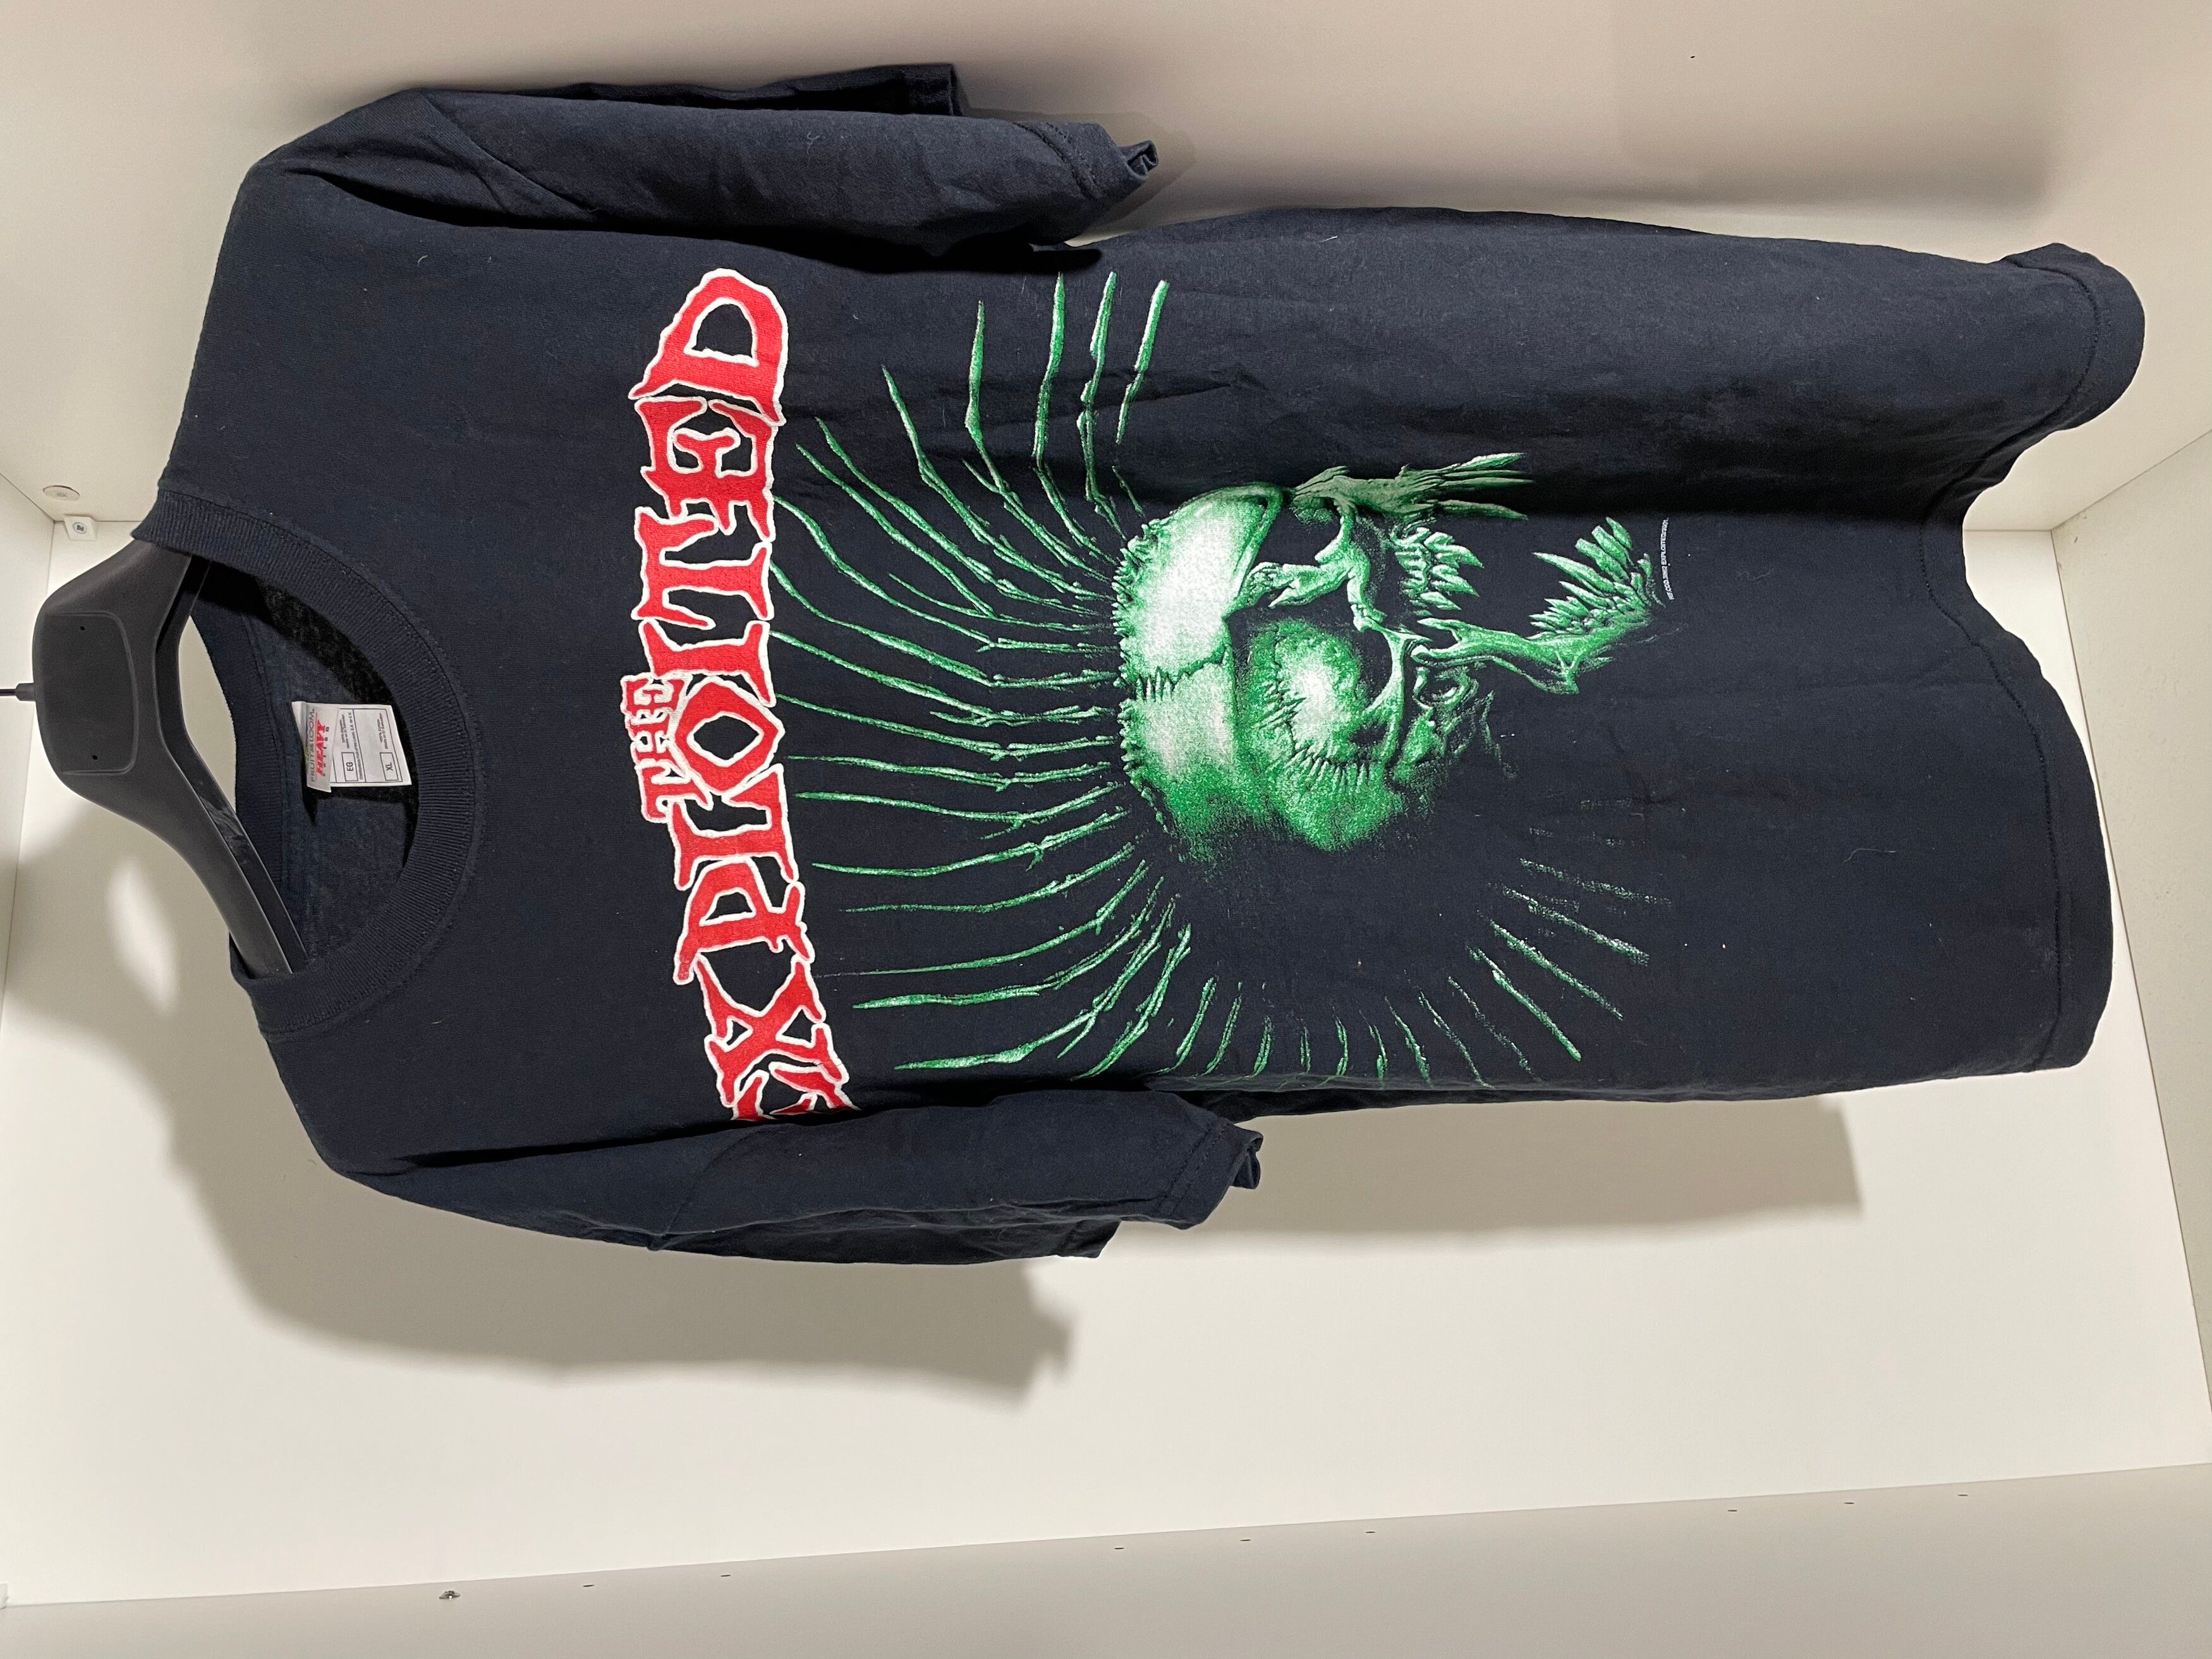 Vintage Vintage The Exploited 2001 Punk Band Fuck the bastards tee Size US XL / EU 56 / 4 - 1 Preview